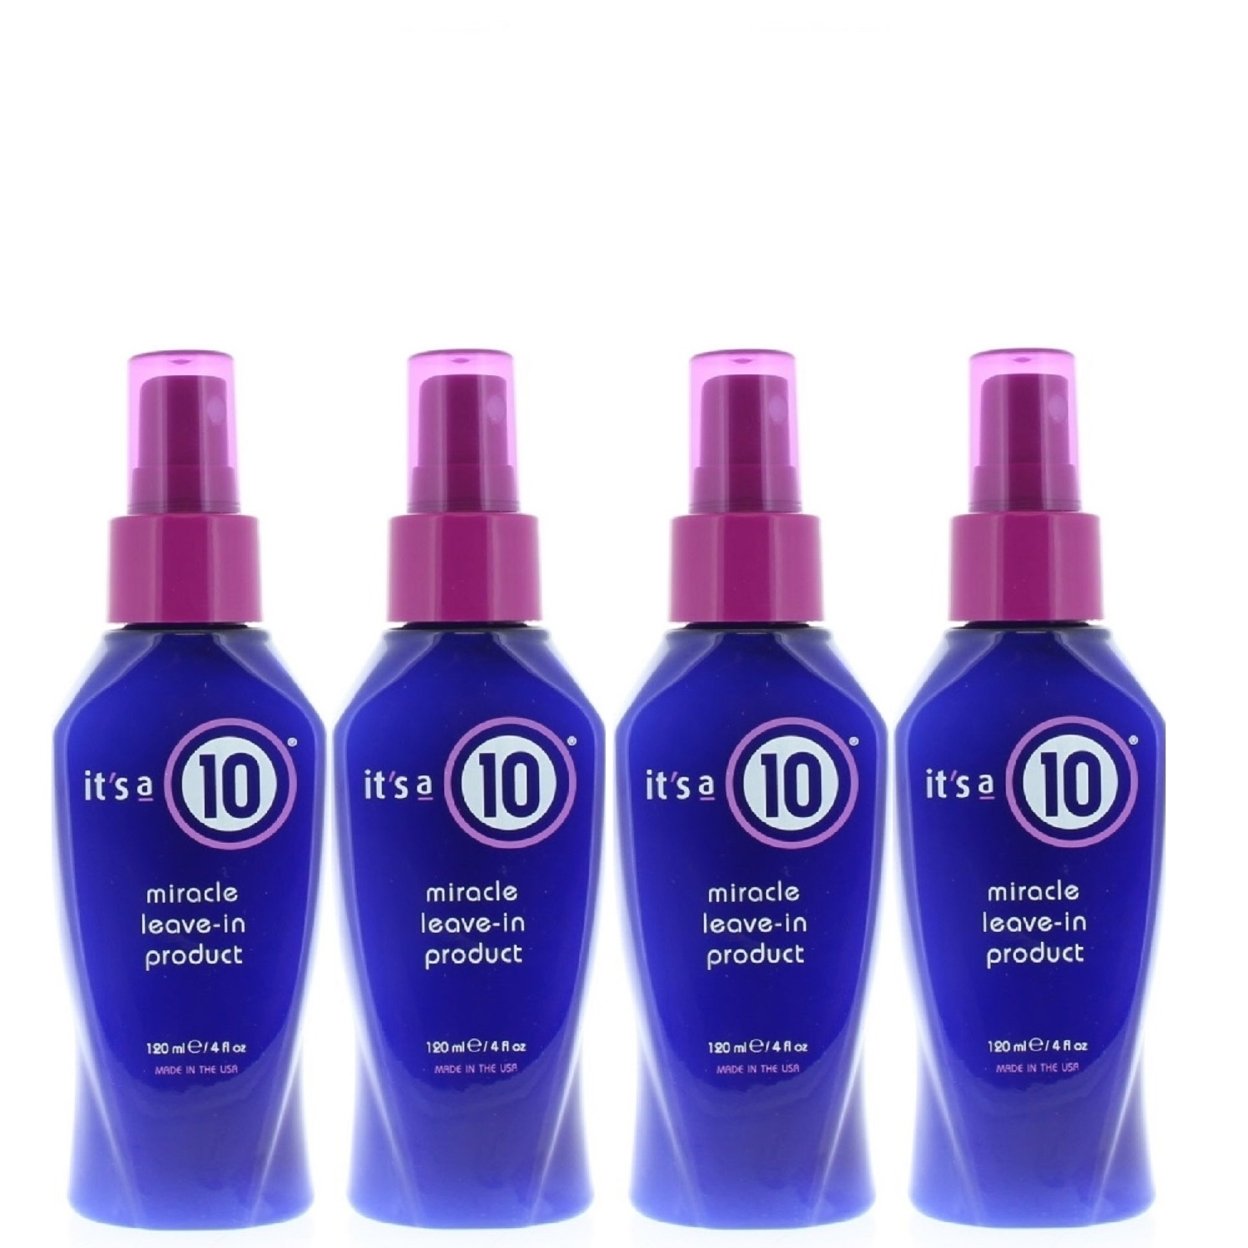 It's A 10 Miracle Leave-In Product 4oz/120ml (4 Pack)